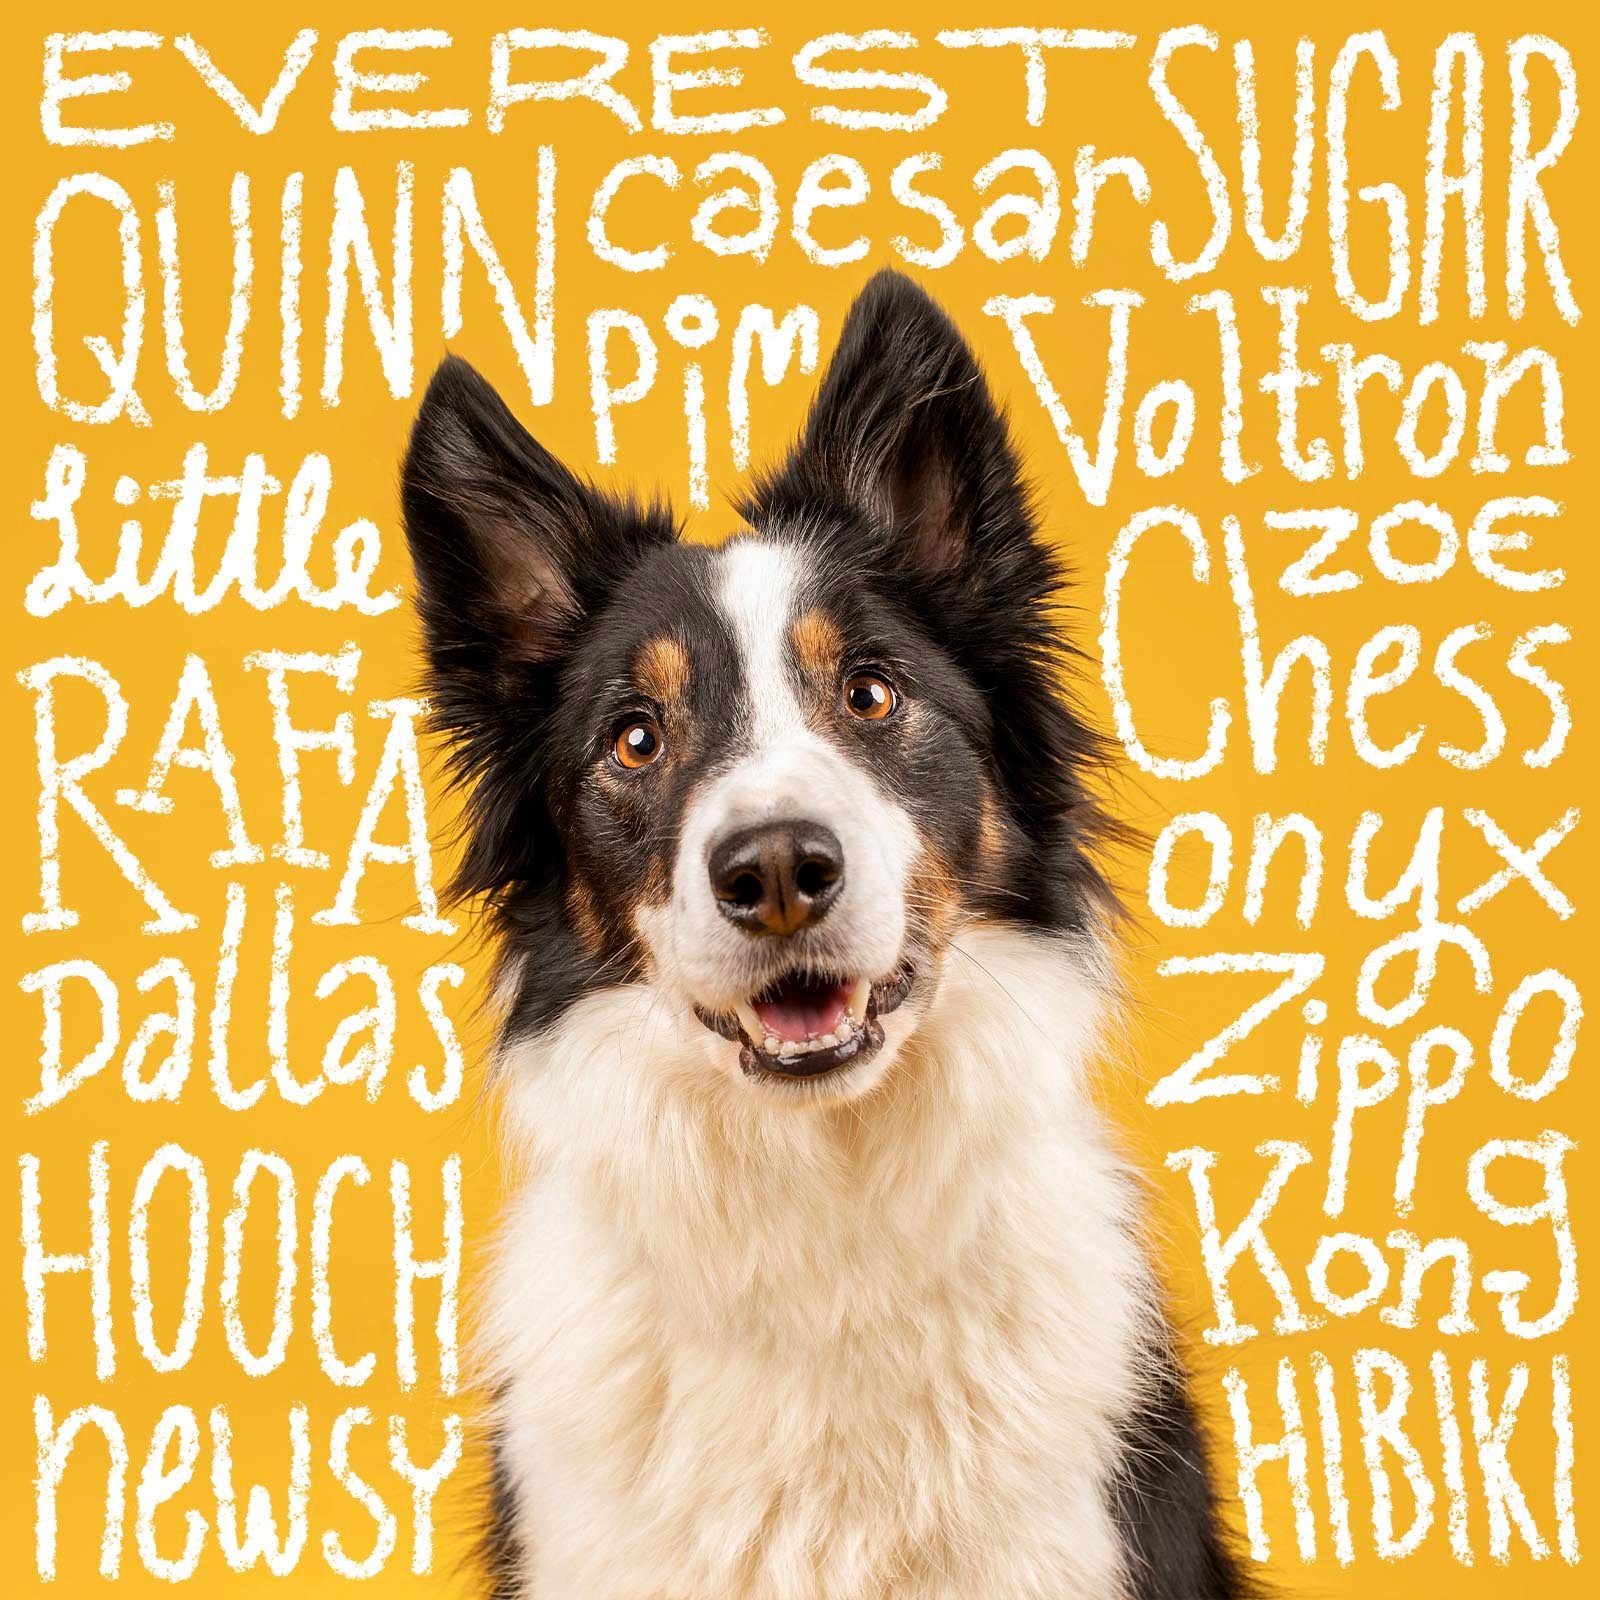 Unique dog names handwritten over an image of a dog